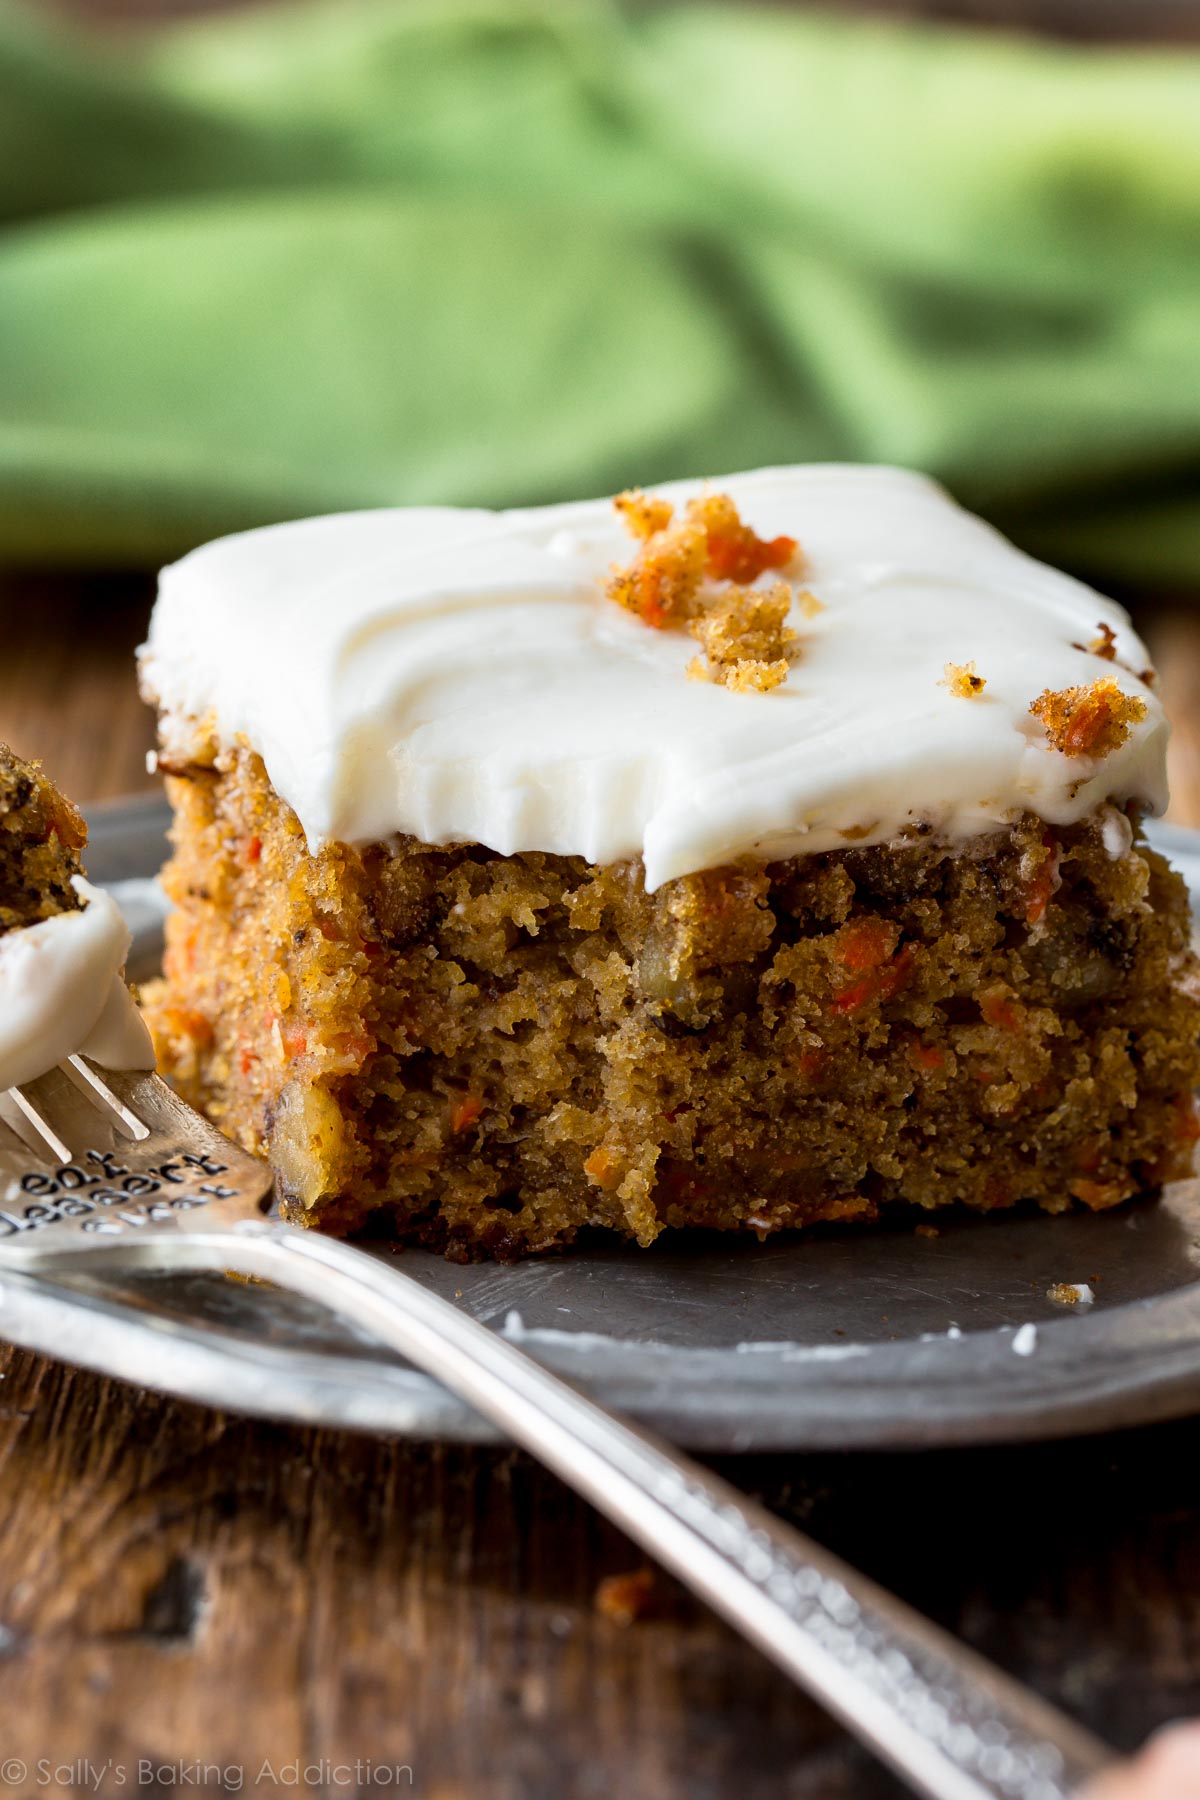 Carrot Cake Recipe - NYT Cooking